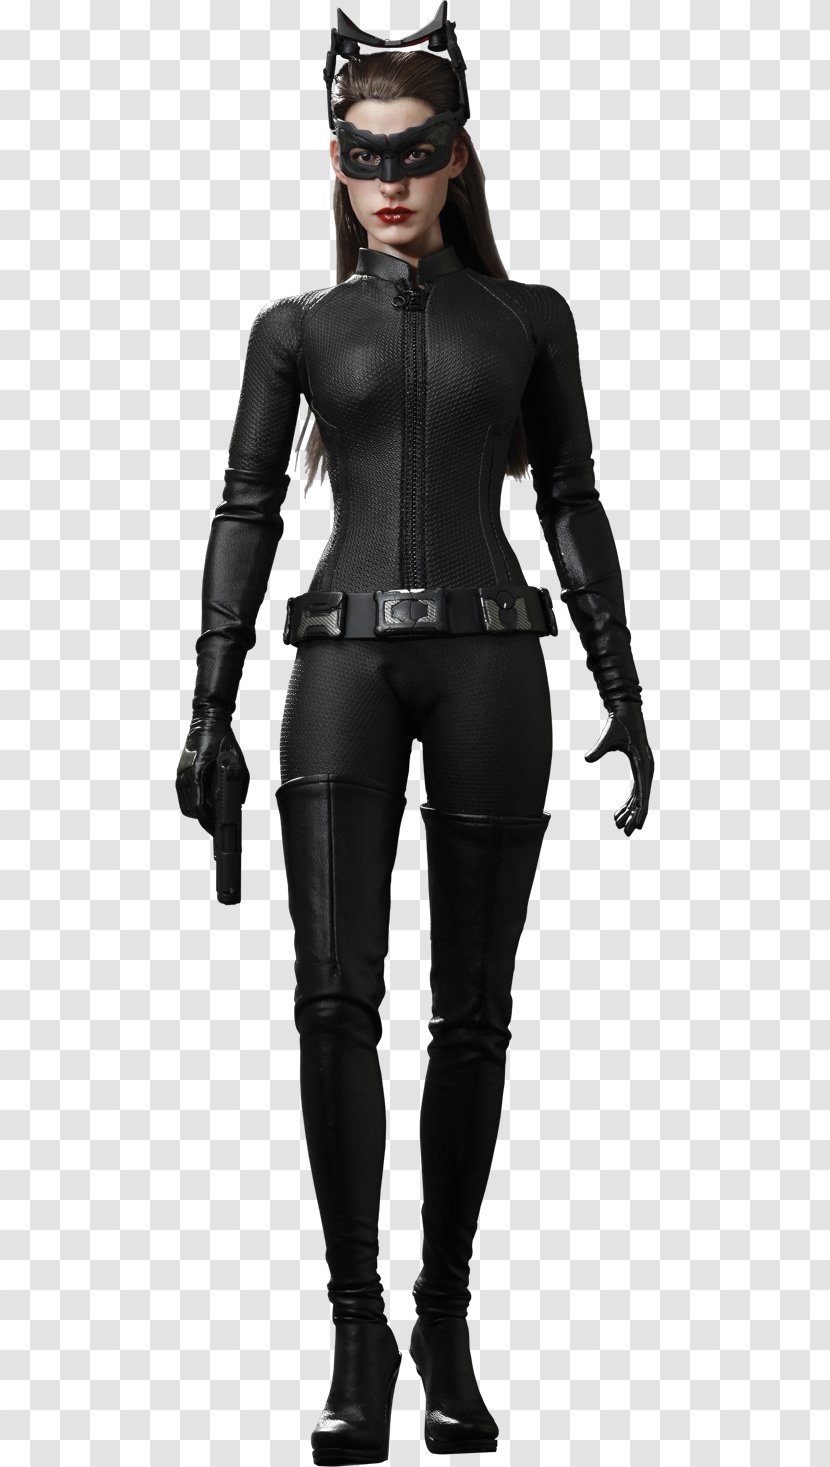 Anne Hathaway Catwoman The Dark Knight Rises Batman Costume - Silhouette Transparent PNG